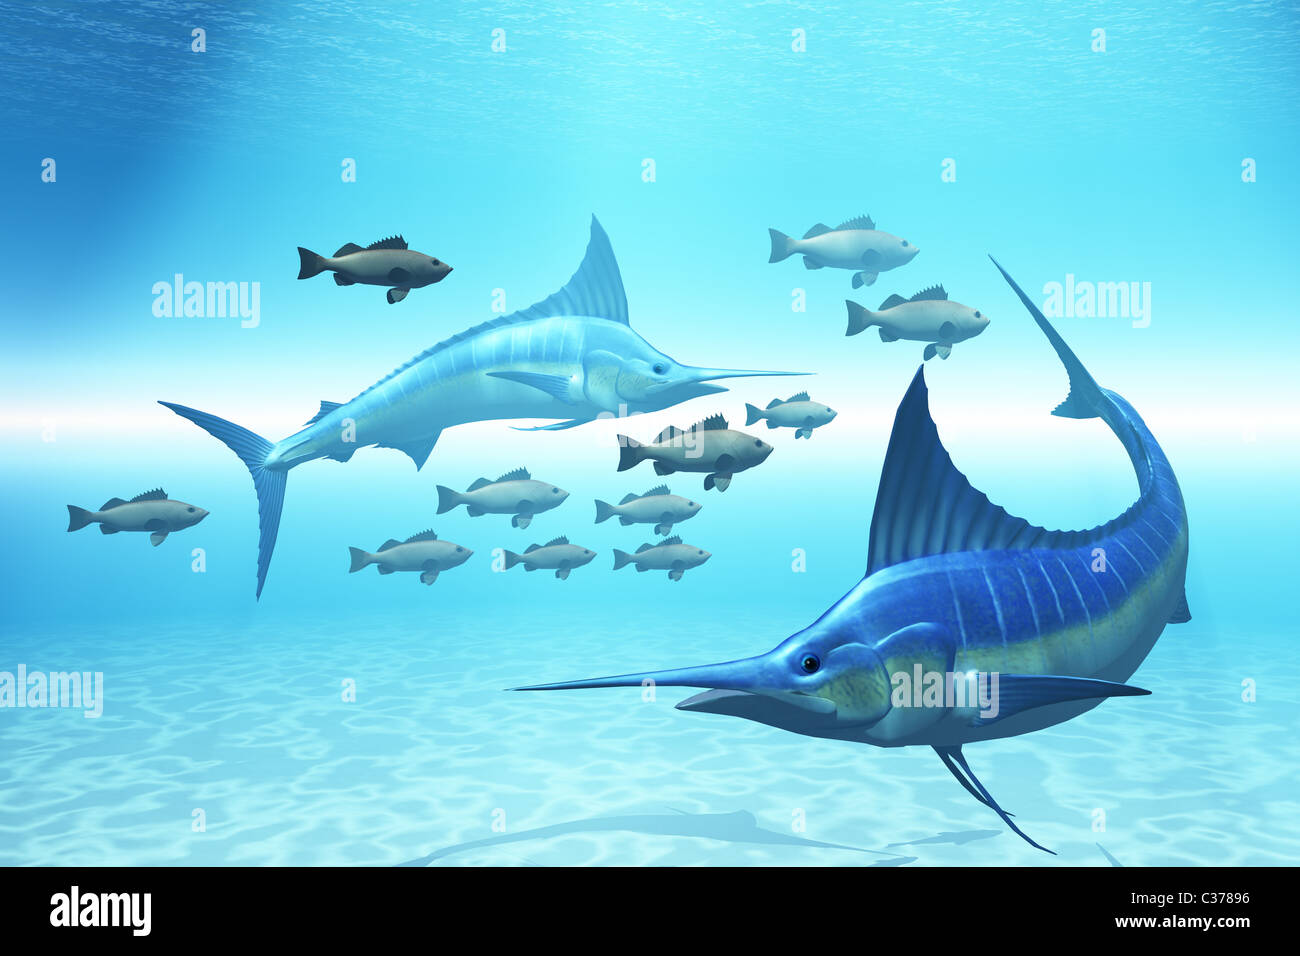 Two blue marlins circle a school of fish in ocean waters. Stock Photo